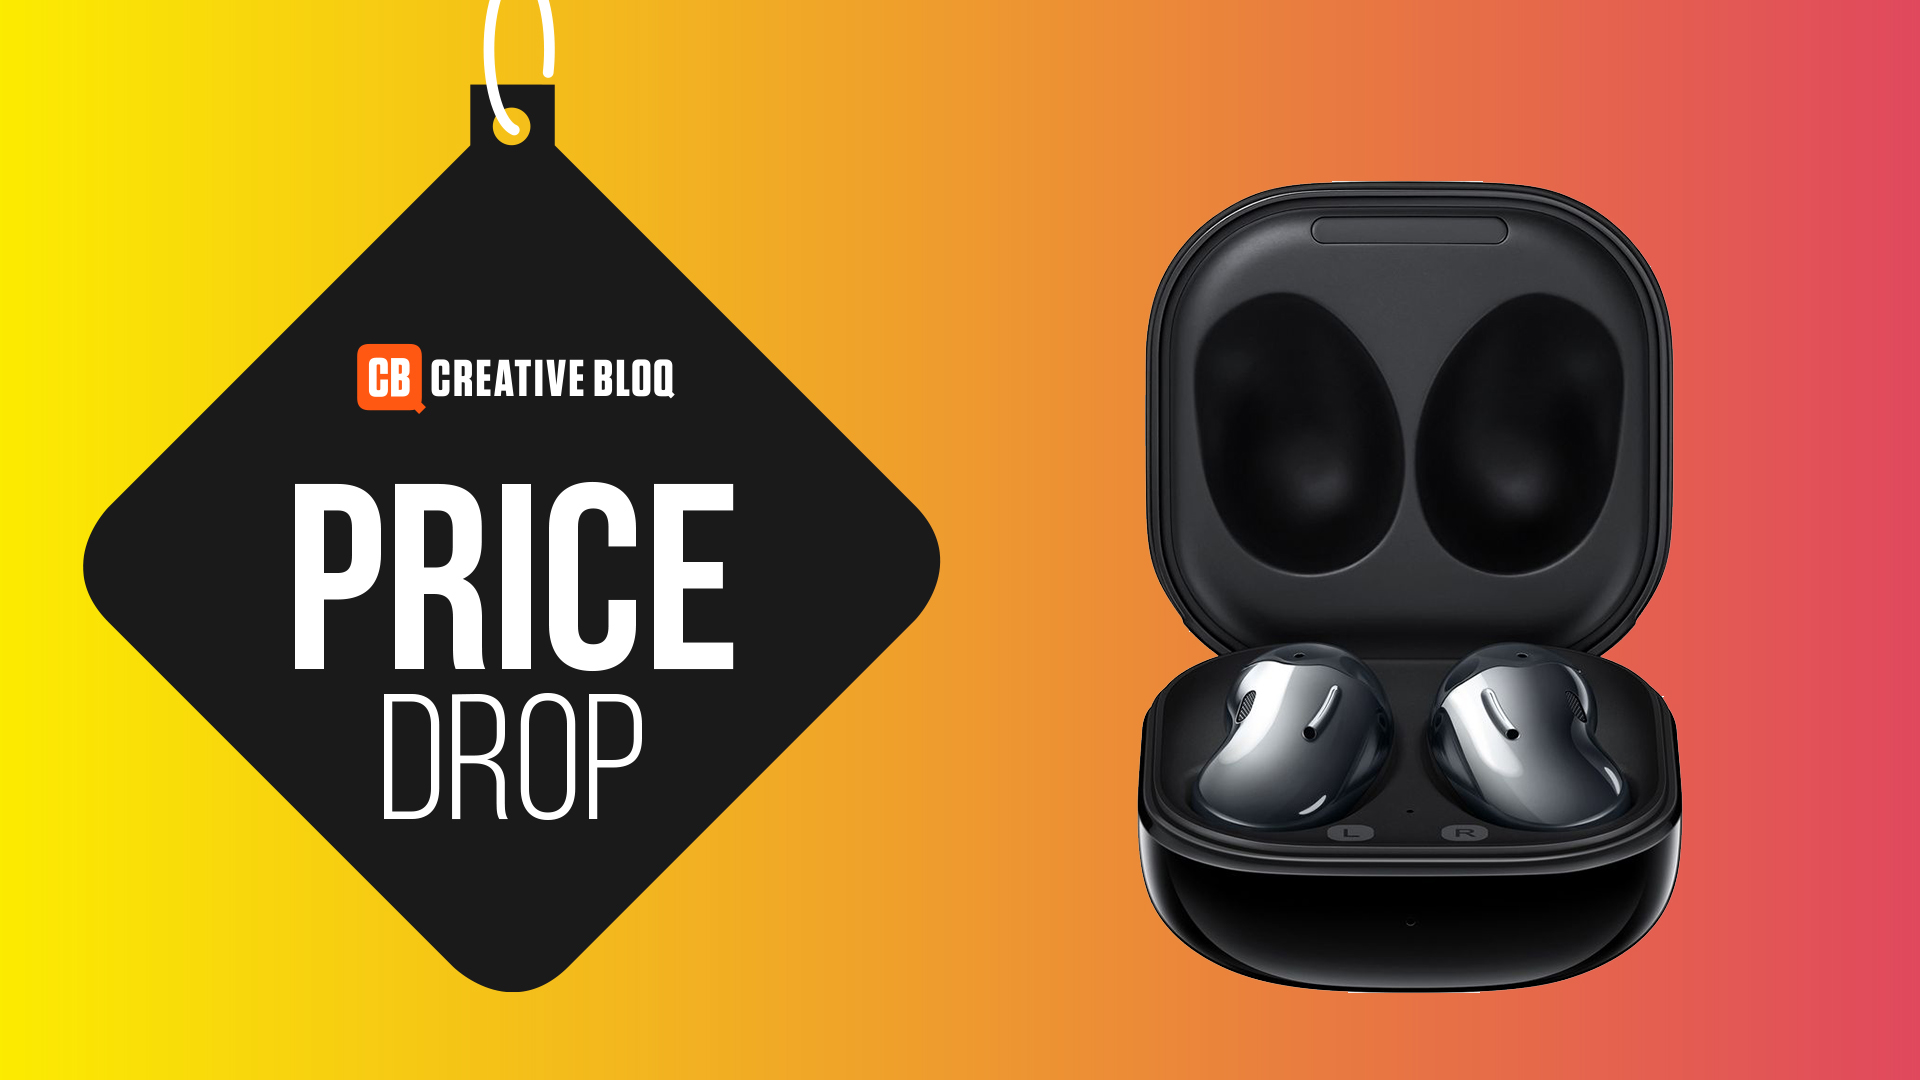 These super-stylish Samsung earbuds are now just $99